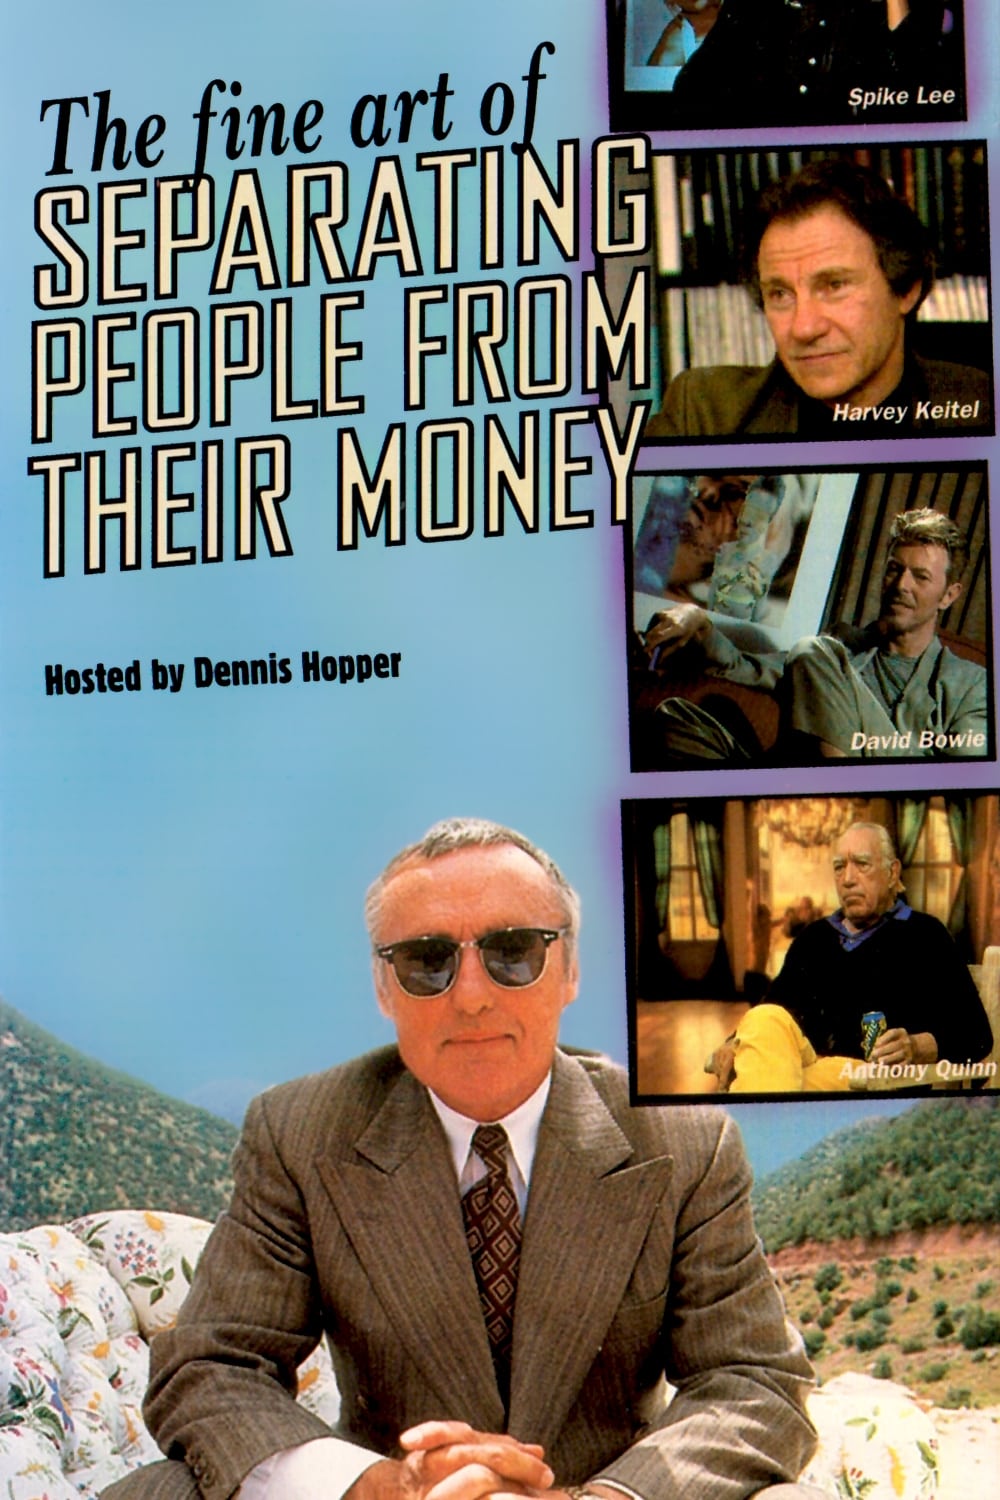 The Fine Art of Separating People from Their Money (1996)